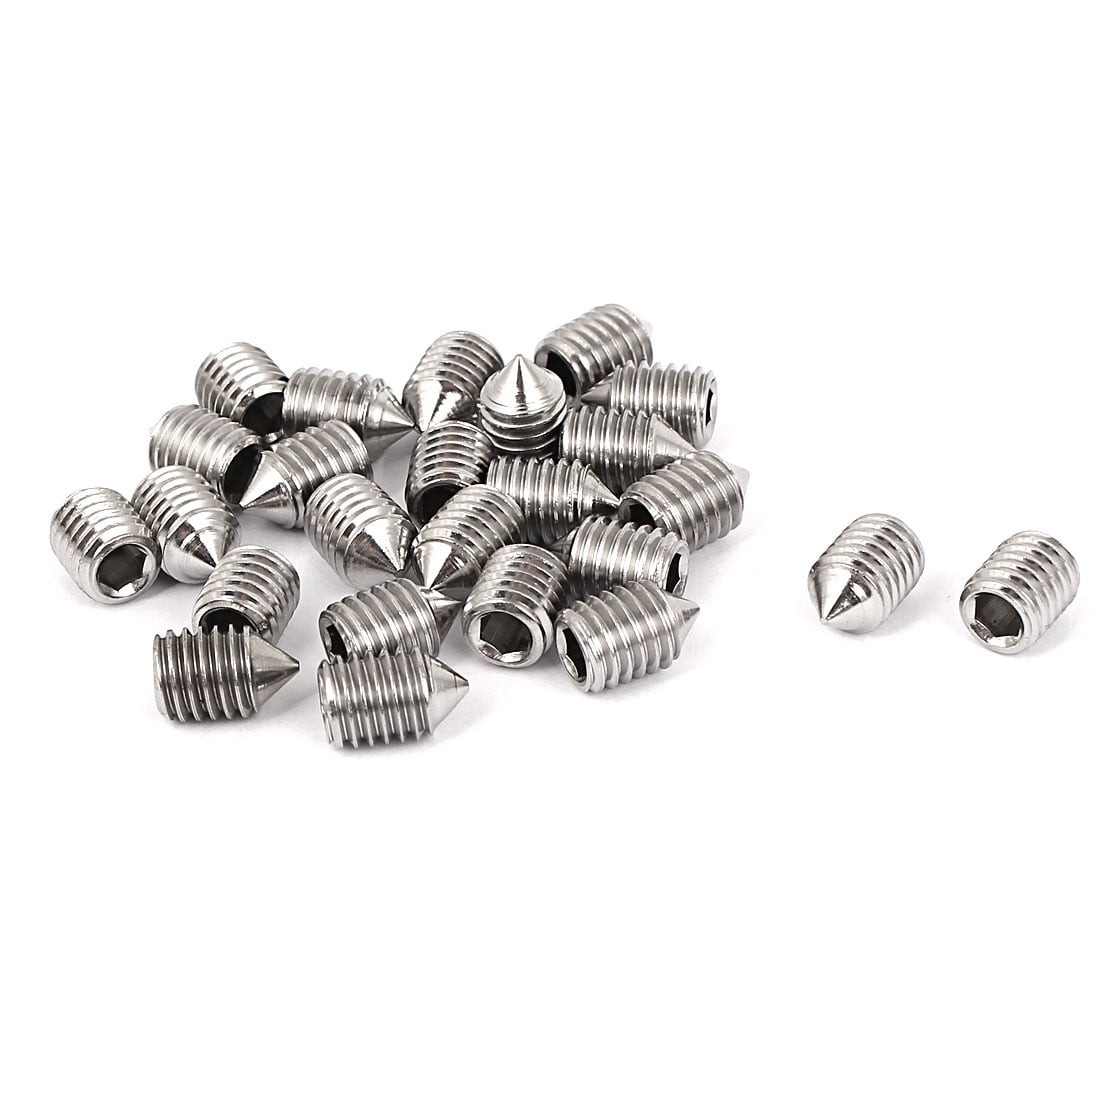 M3 x 12mm A2 18-8 Stainless Steel Set Screws Cone Point Grub 